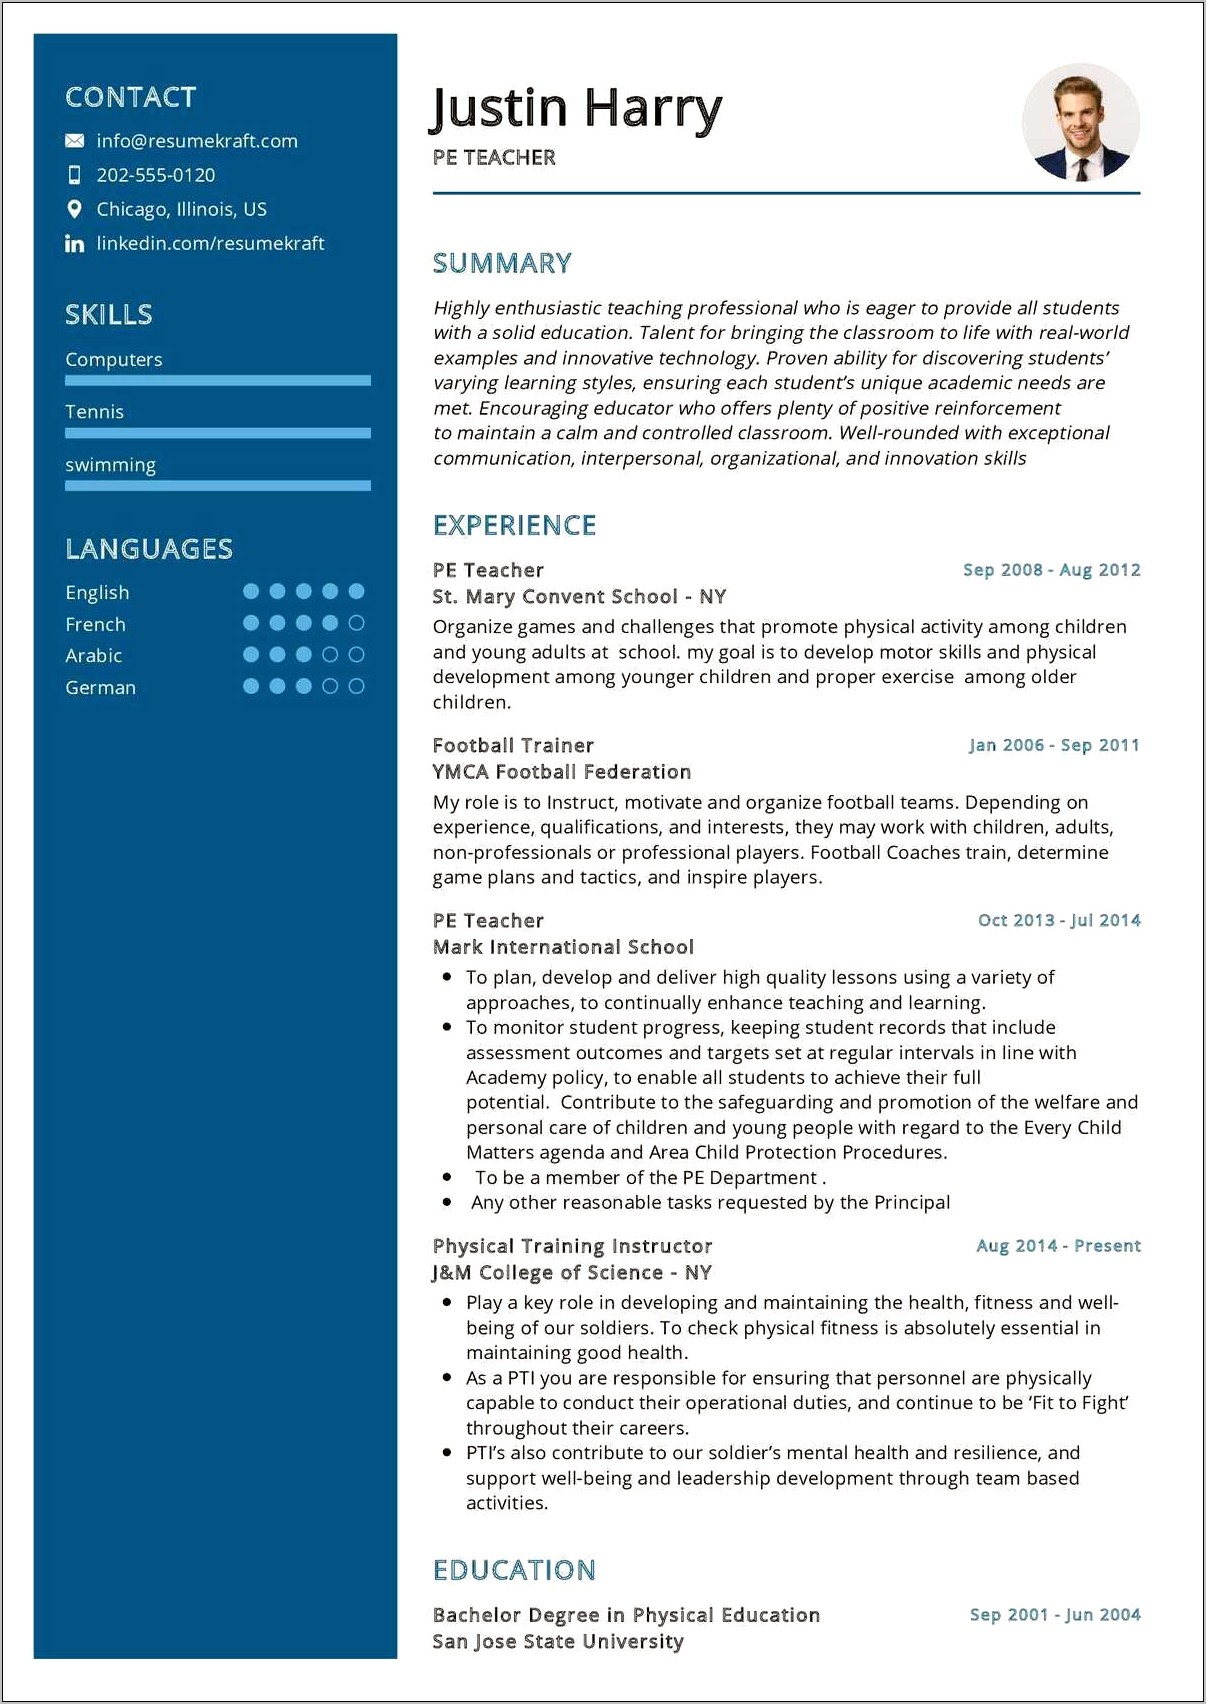 Skills For Athletic Director Resume